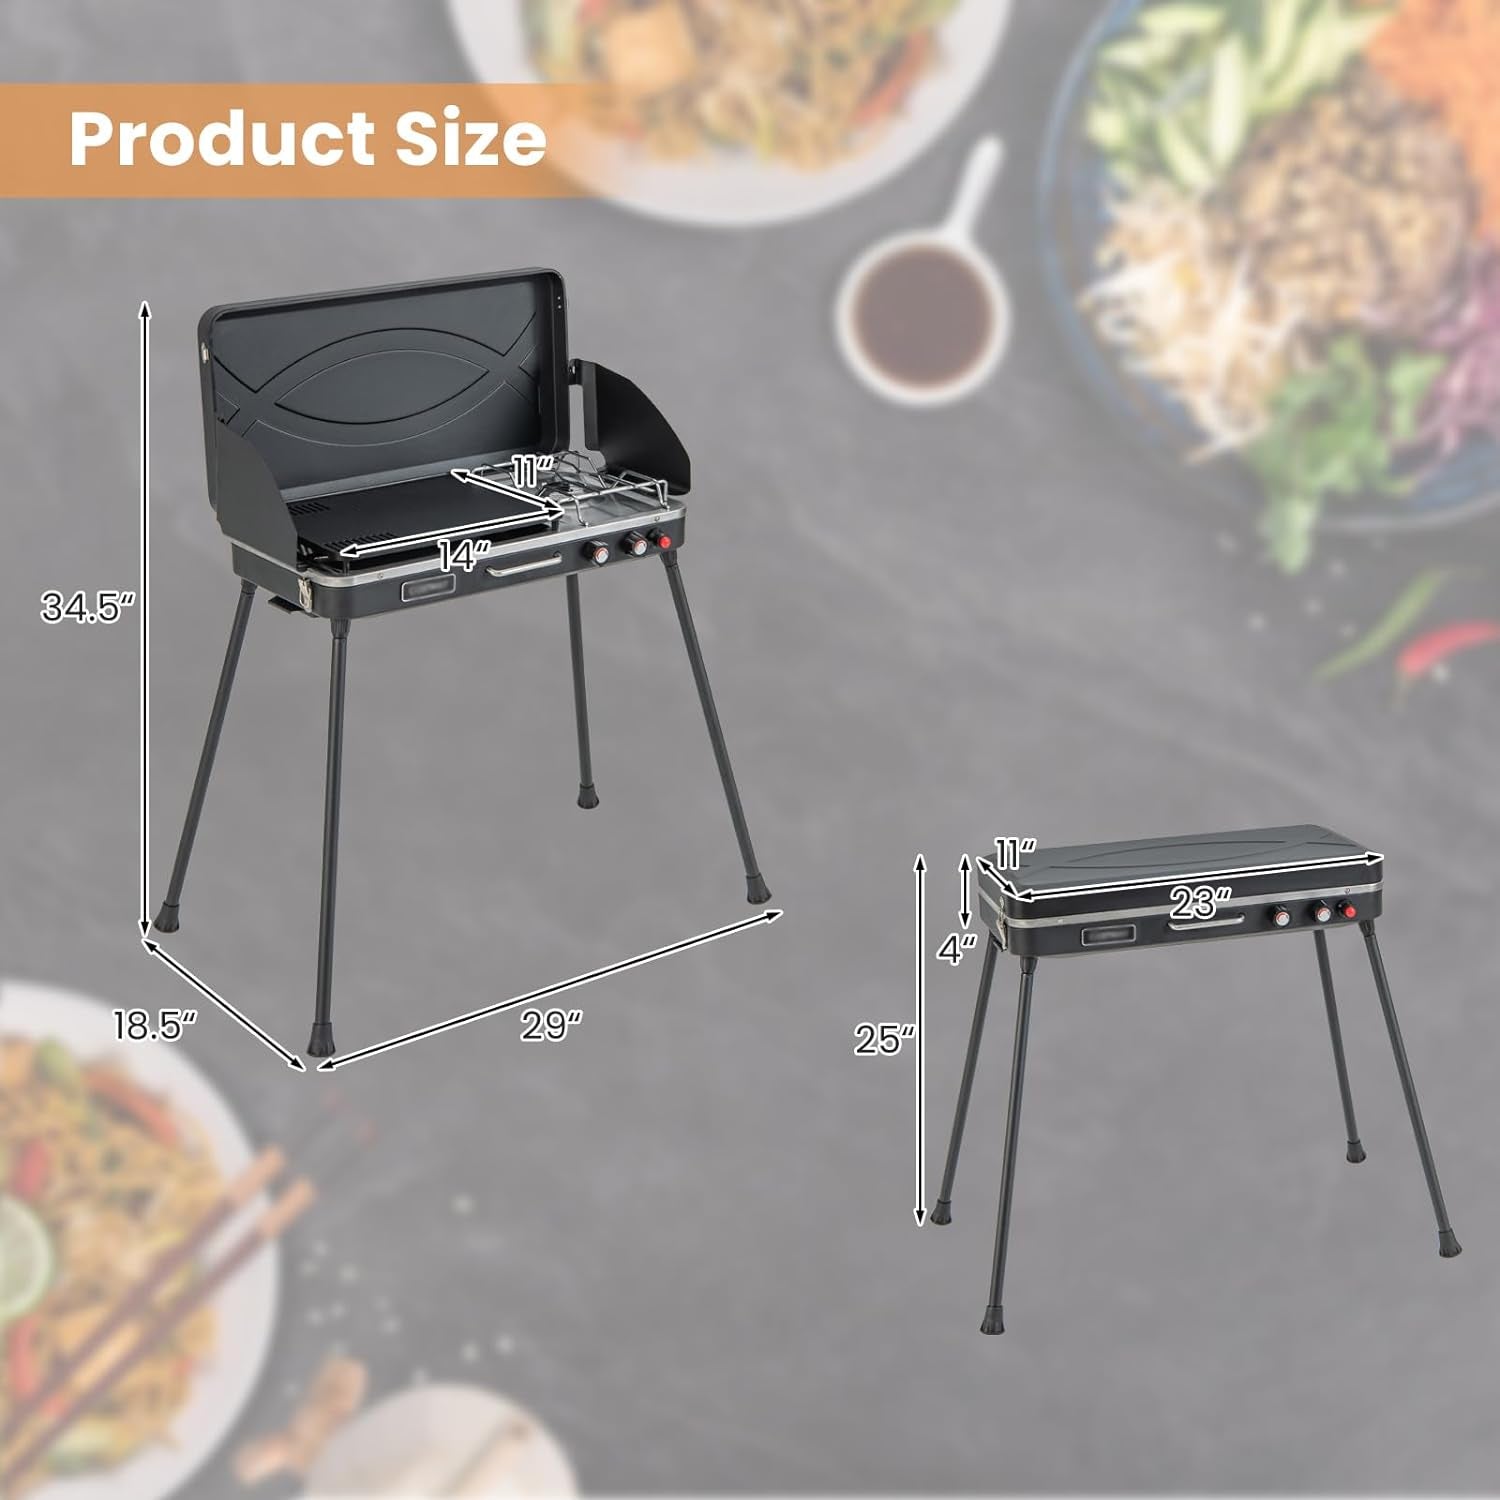 2-Burner Propane Camping Stove, Portable Gas Grill Cooker with Removable Leg Stand, Roast Grill, Dual Control Knobs, Wind Guards, Outdoor Grill Stove for Camping BBQ Picnic